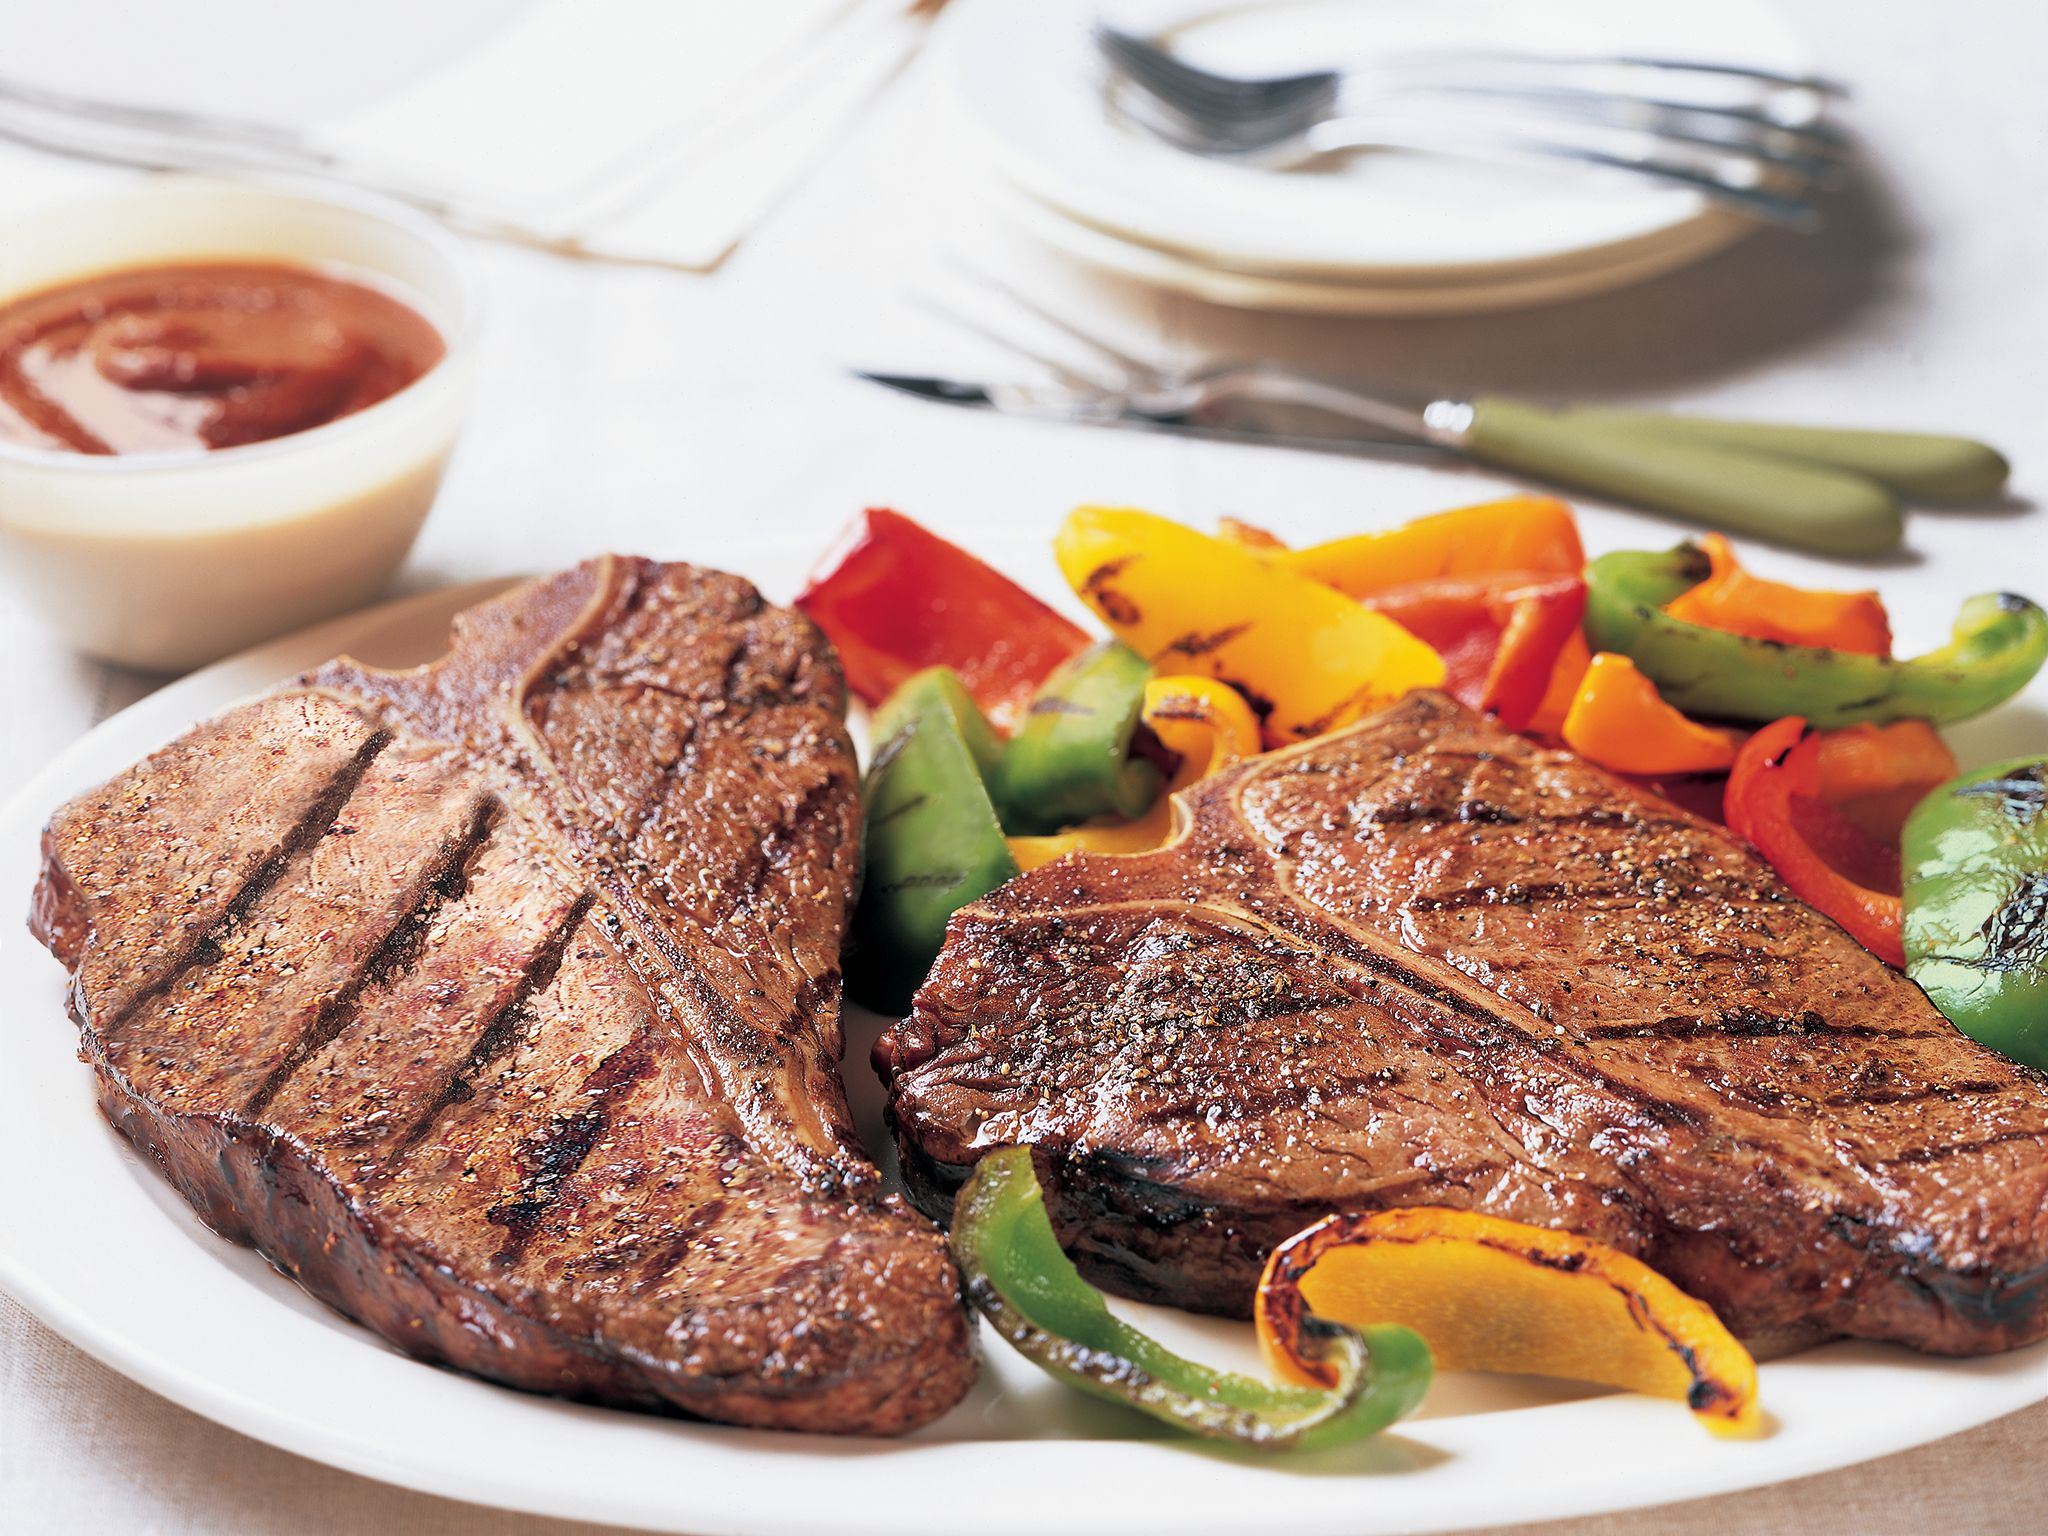 Tantalize Your Taste Buds with this Mouth-Watering Braai-Spiced T-Bone Steak Recipe